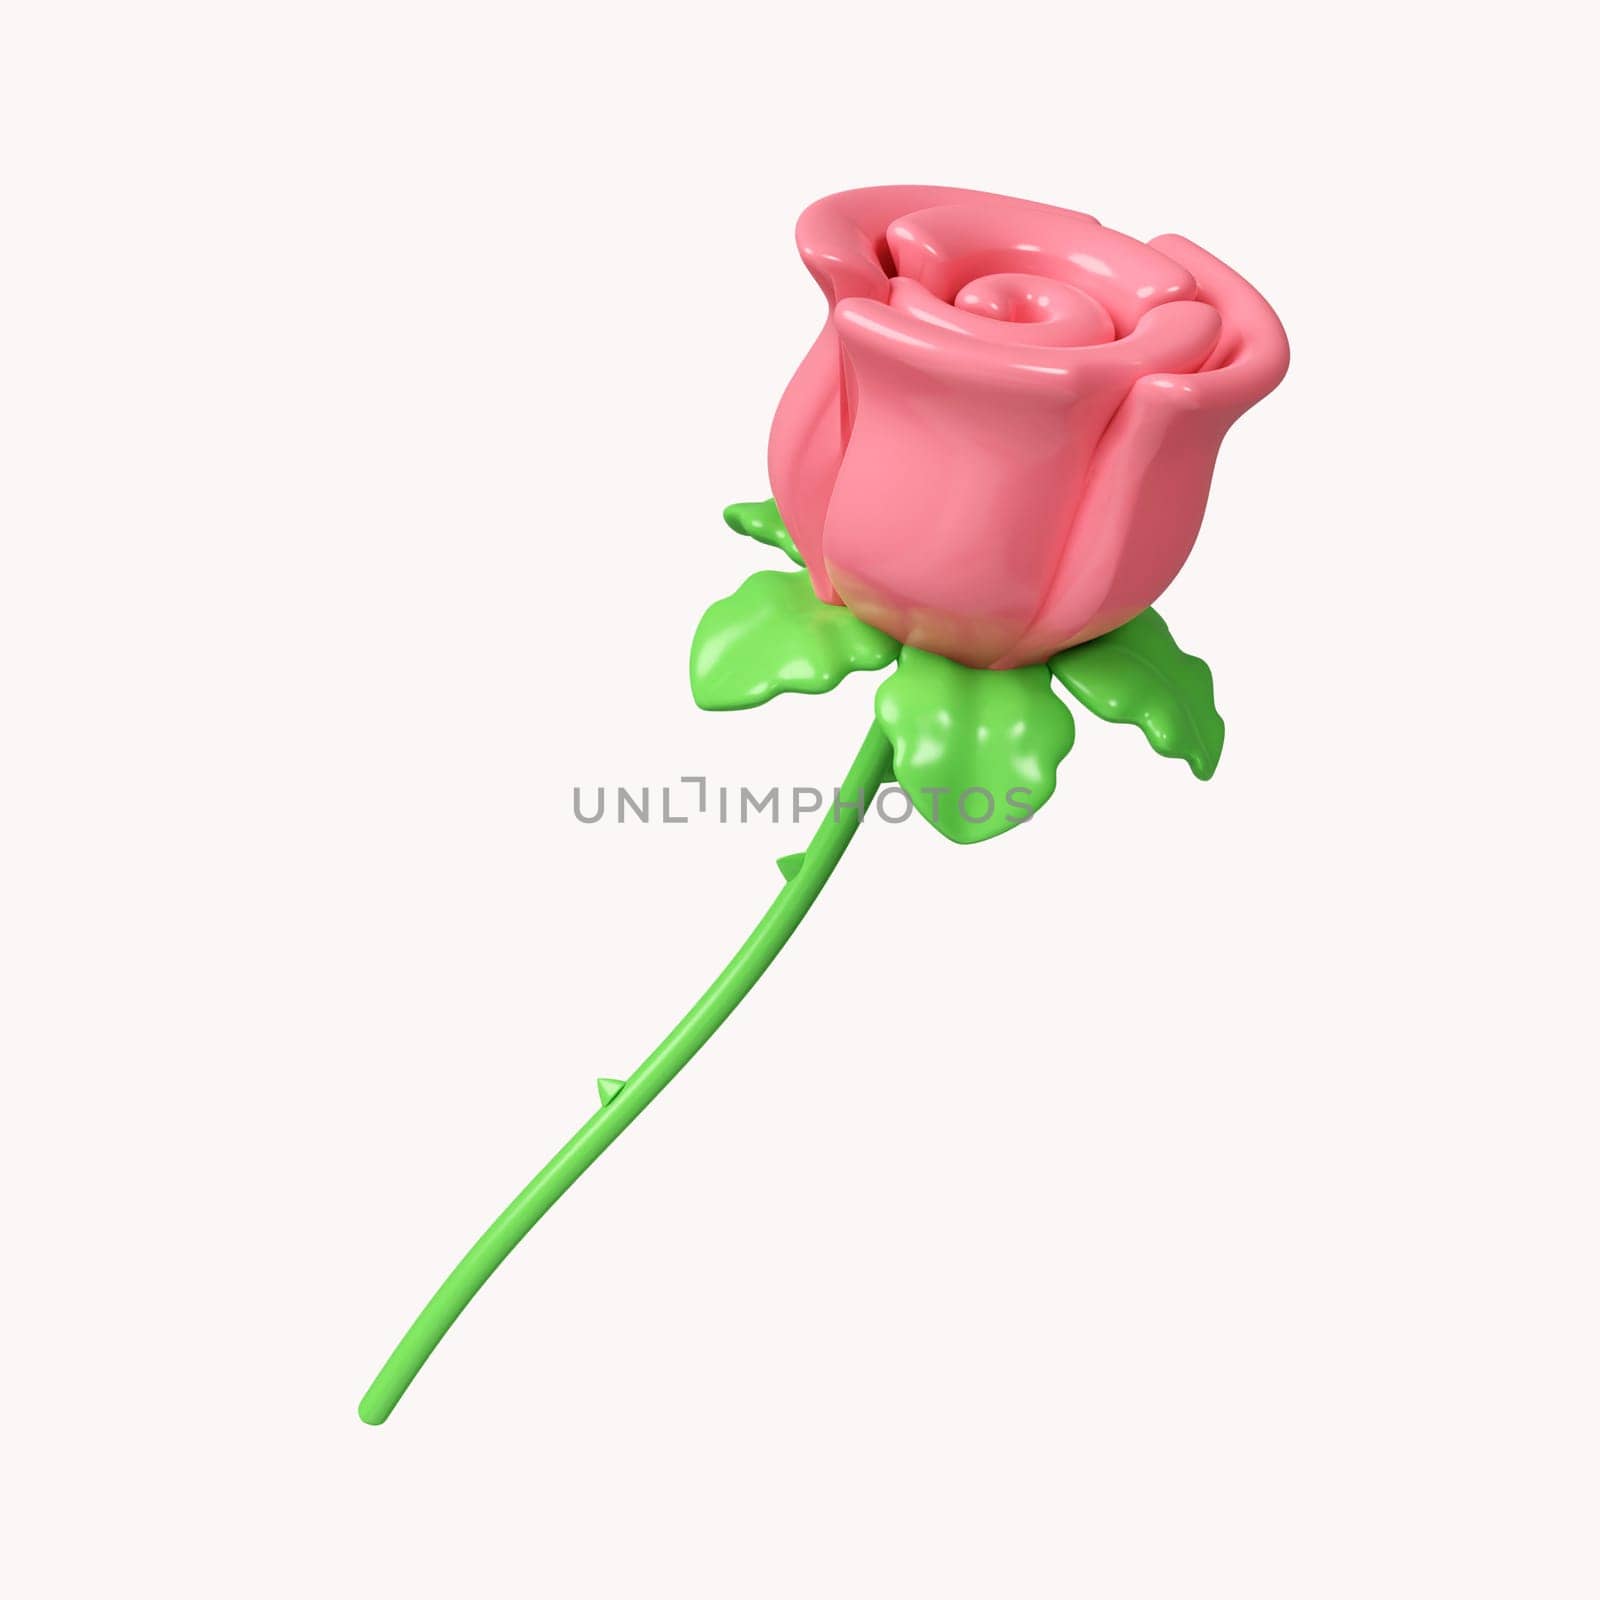 3d Rose flowers .icon isolated on white background. 3d rendering illustration. Clipping path. by meepiangraphic